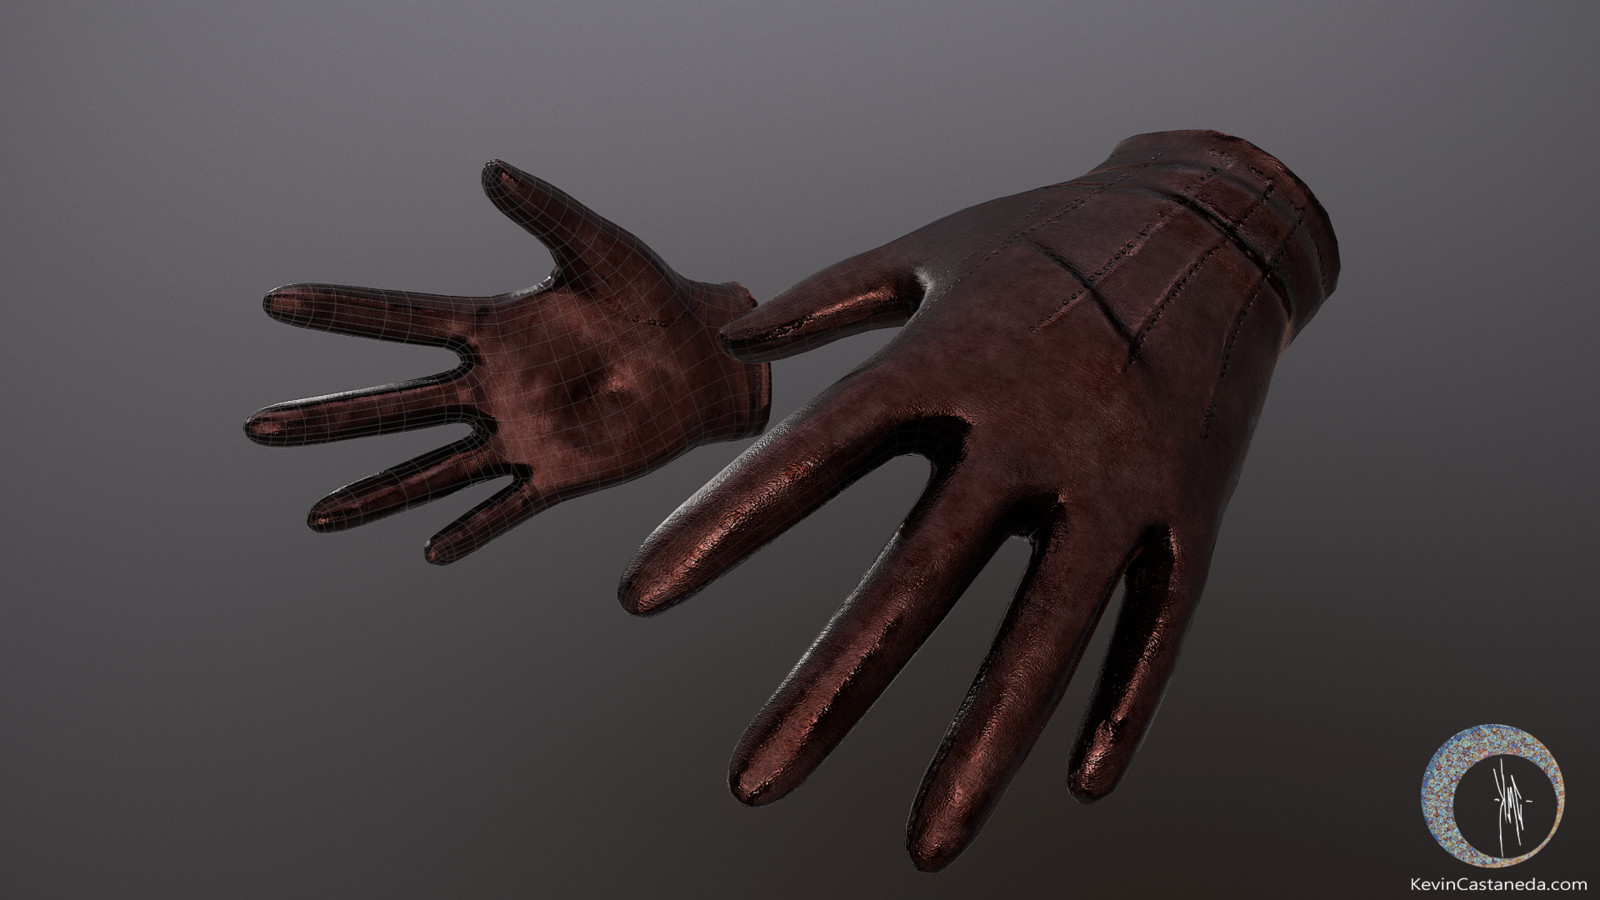 Hands for VR. Cloth was done in Zbrush. Modeled in Maya. Textured in Substance Painter.